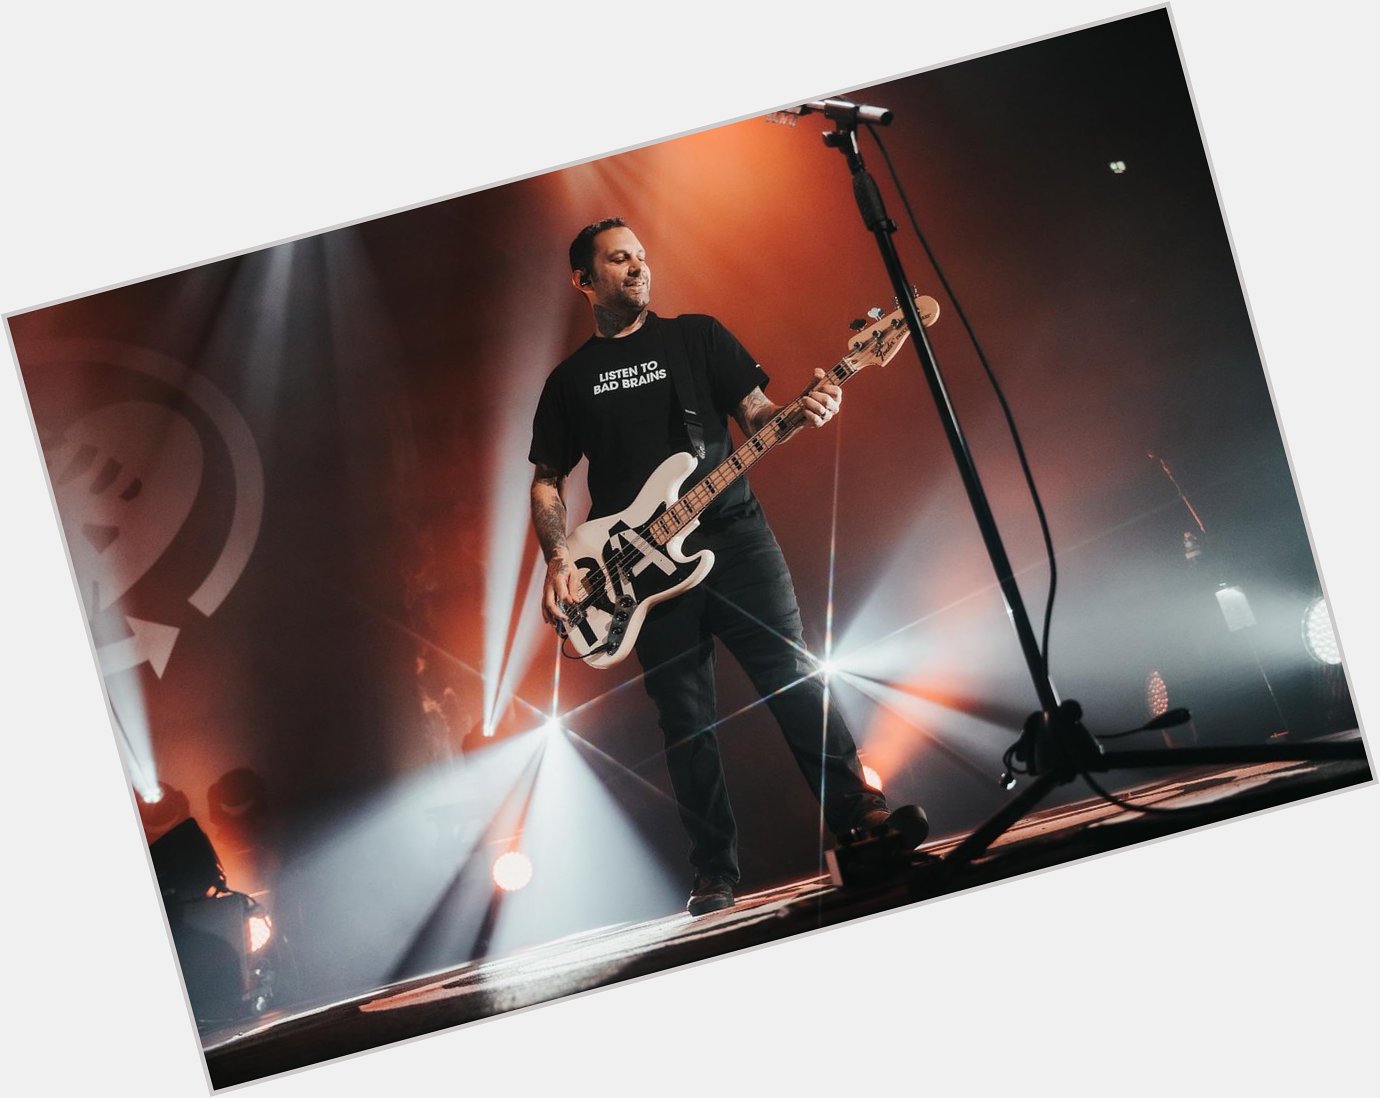 I d like to wish a happy 48th birthday to Joe Principe, bassist for Rise Against! 